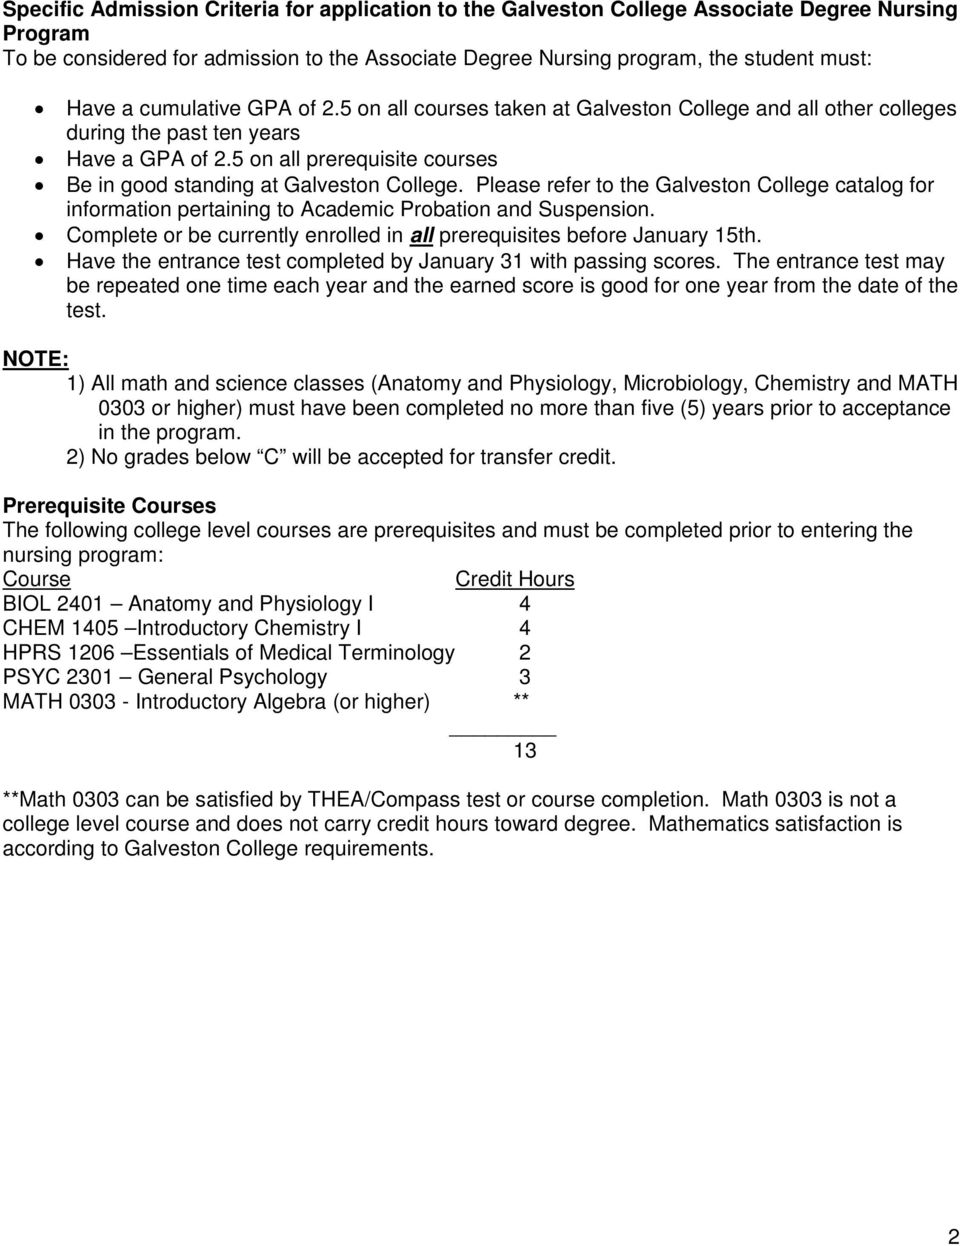 Please refer to the Galveston College catalog for information pertaining to Academic Probation and Suspension. Complete or be currently enrolled in all prerequisites before January 15th.